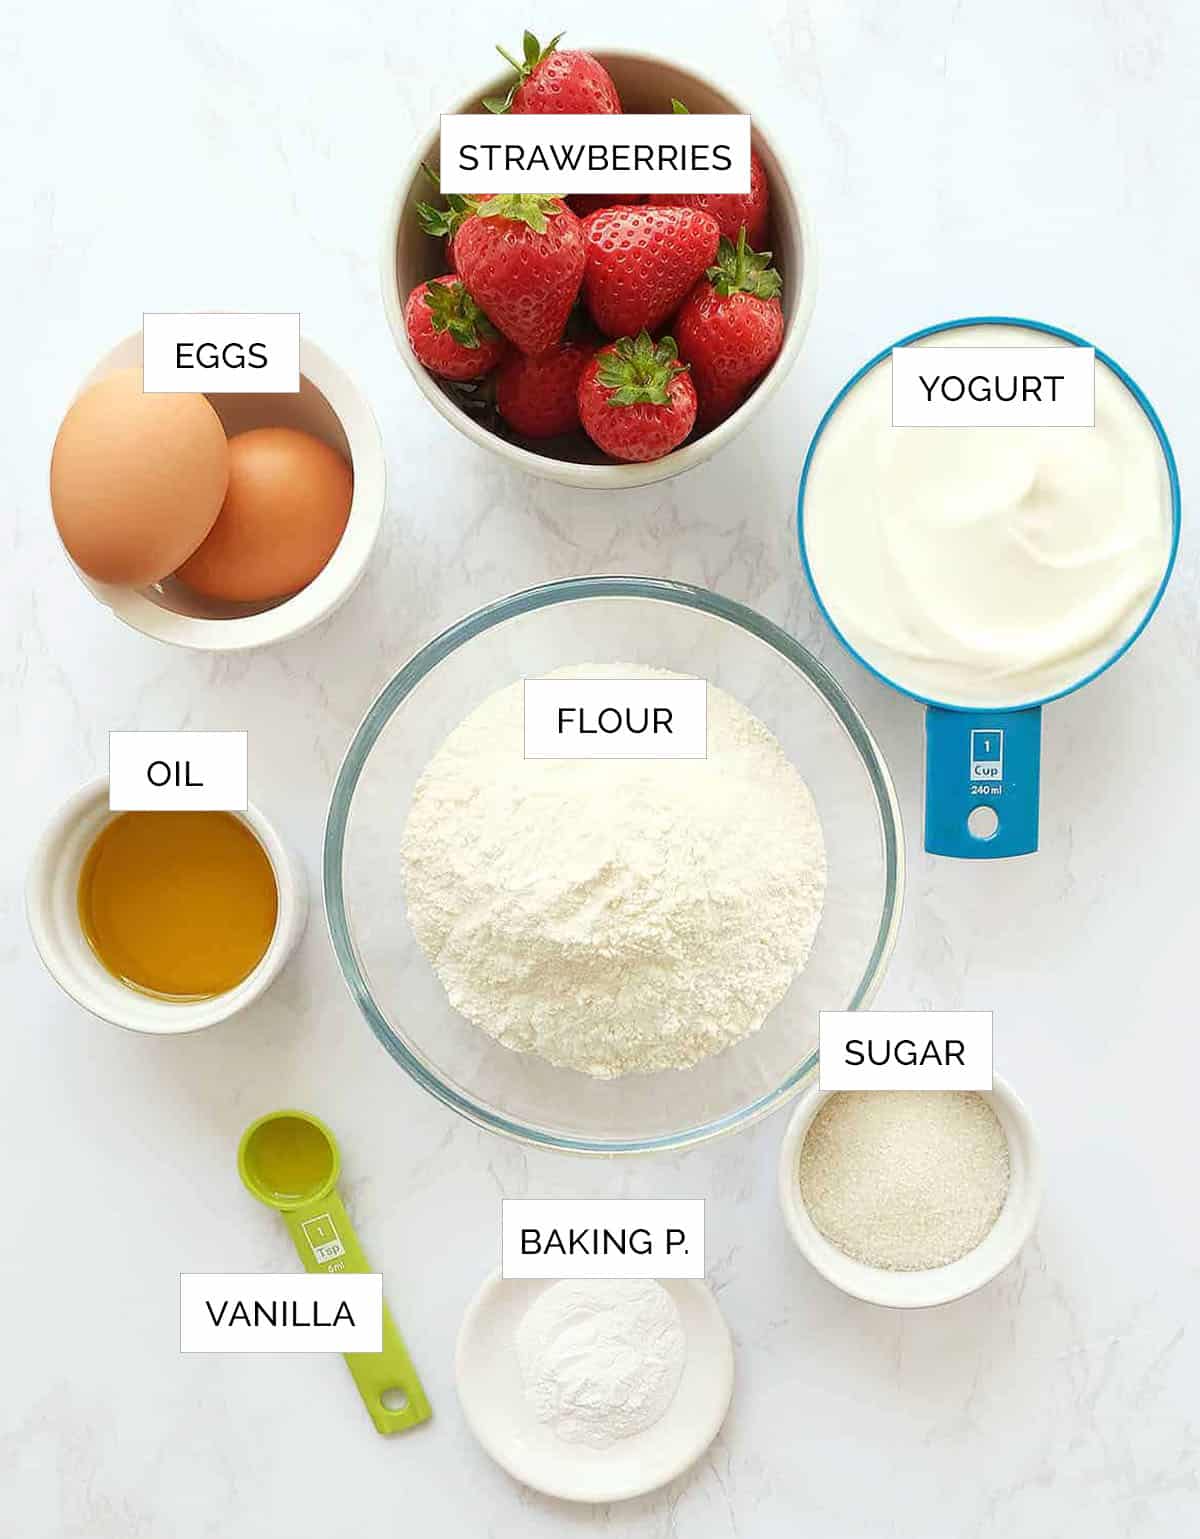 The ingredients for this strawberry bread are arranged on a white marble surface.